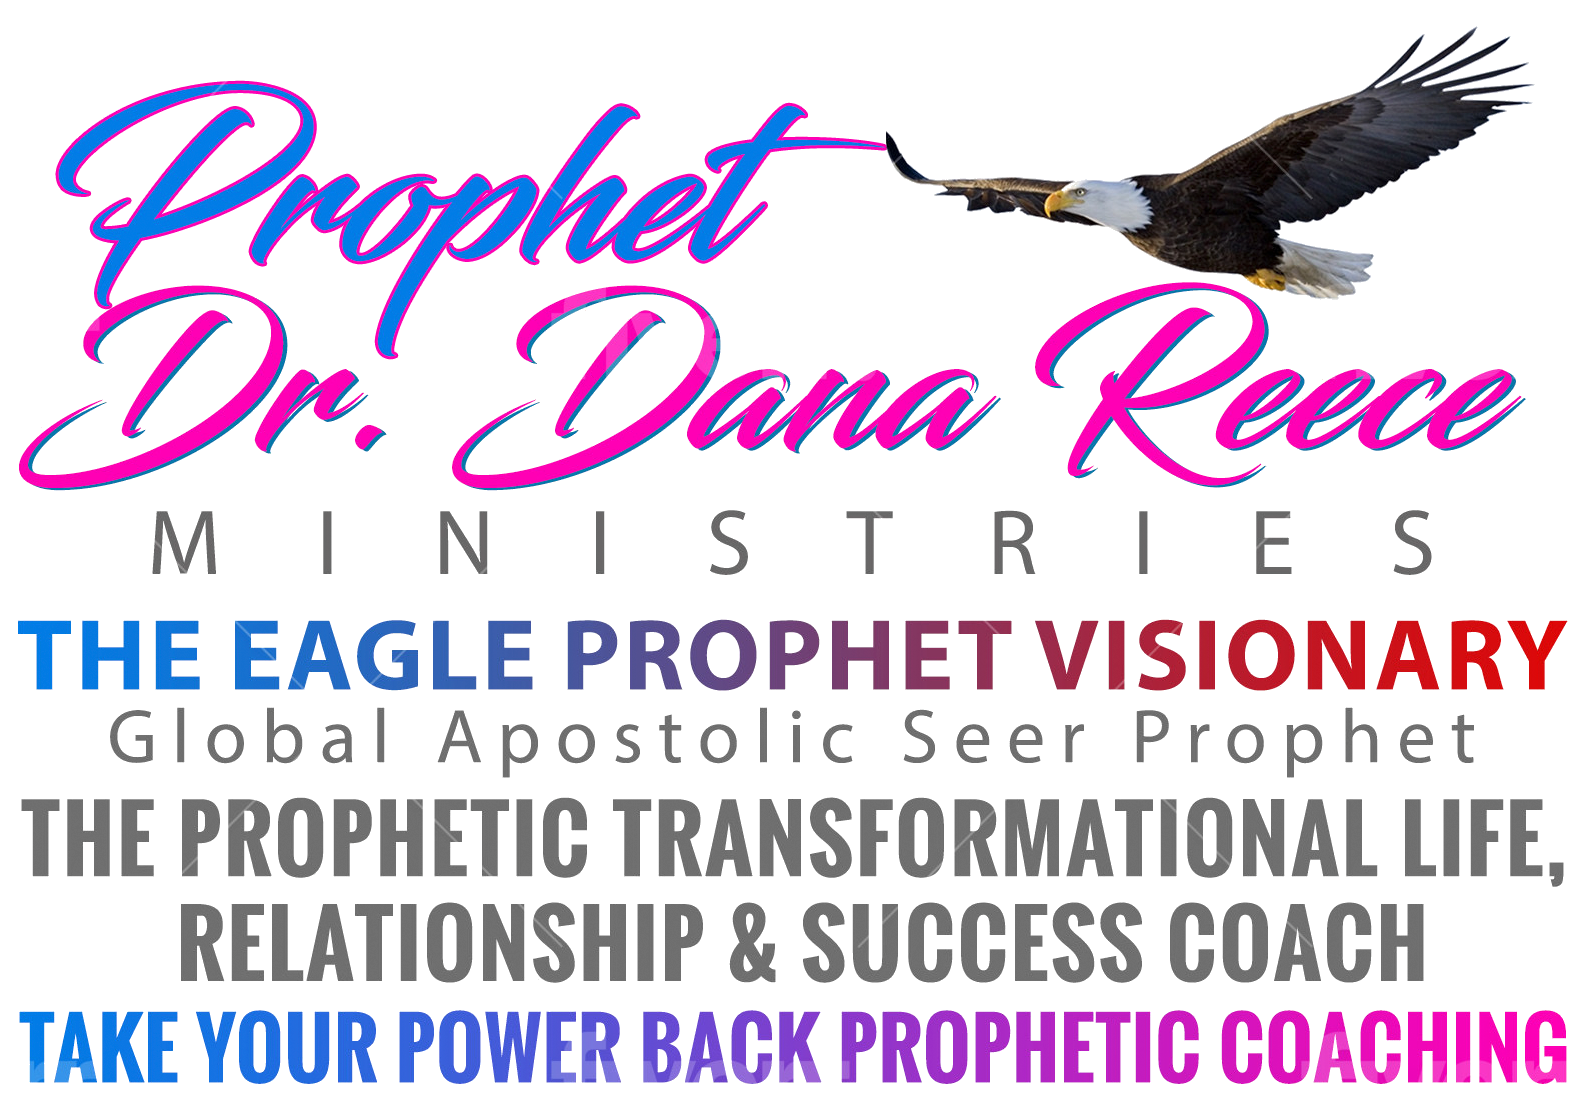 Take Your Power Back Prophetic Coaching & Eagle Vision Prophetic Ministries